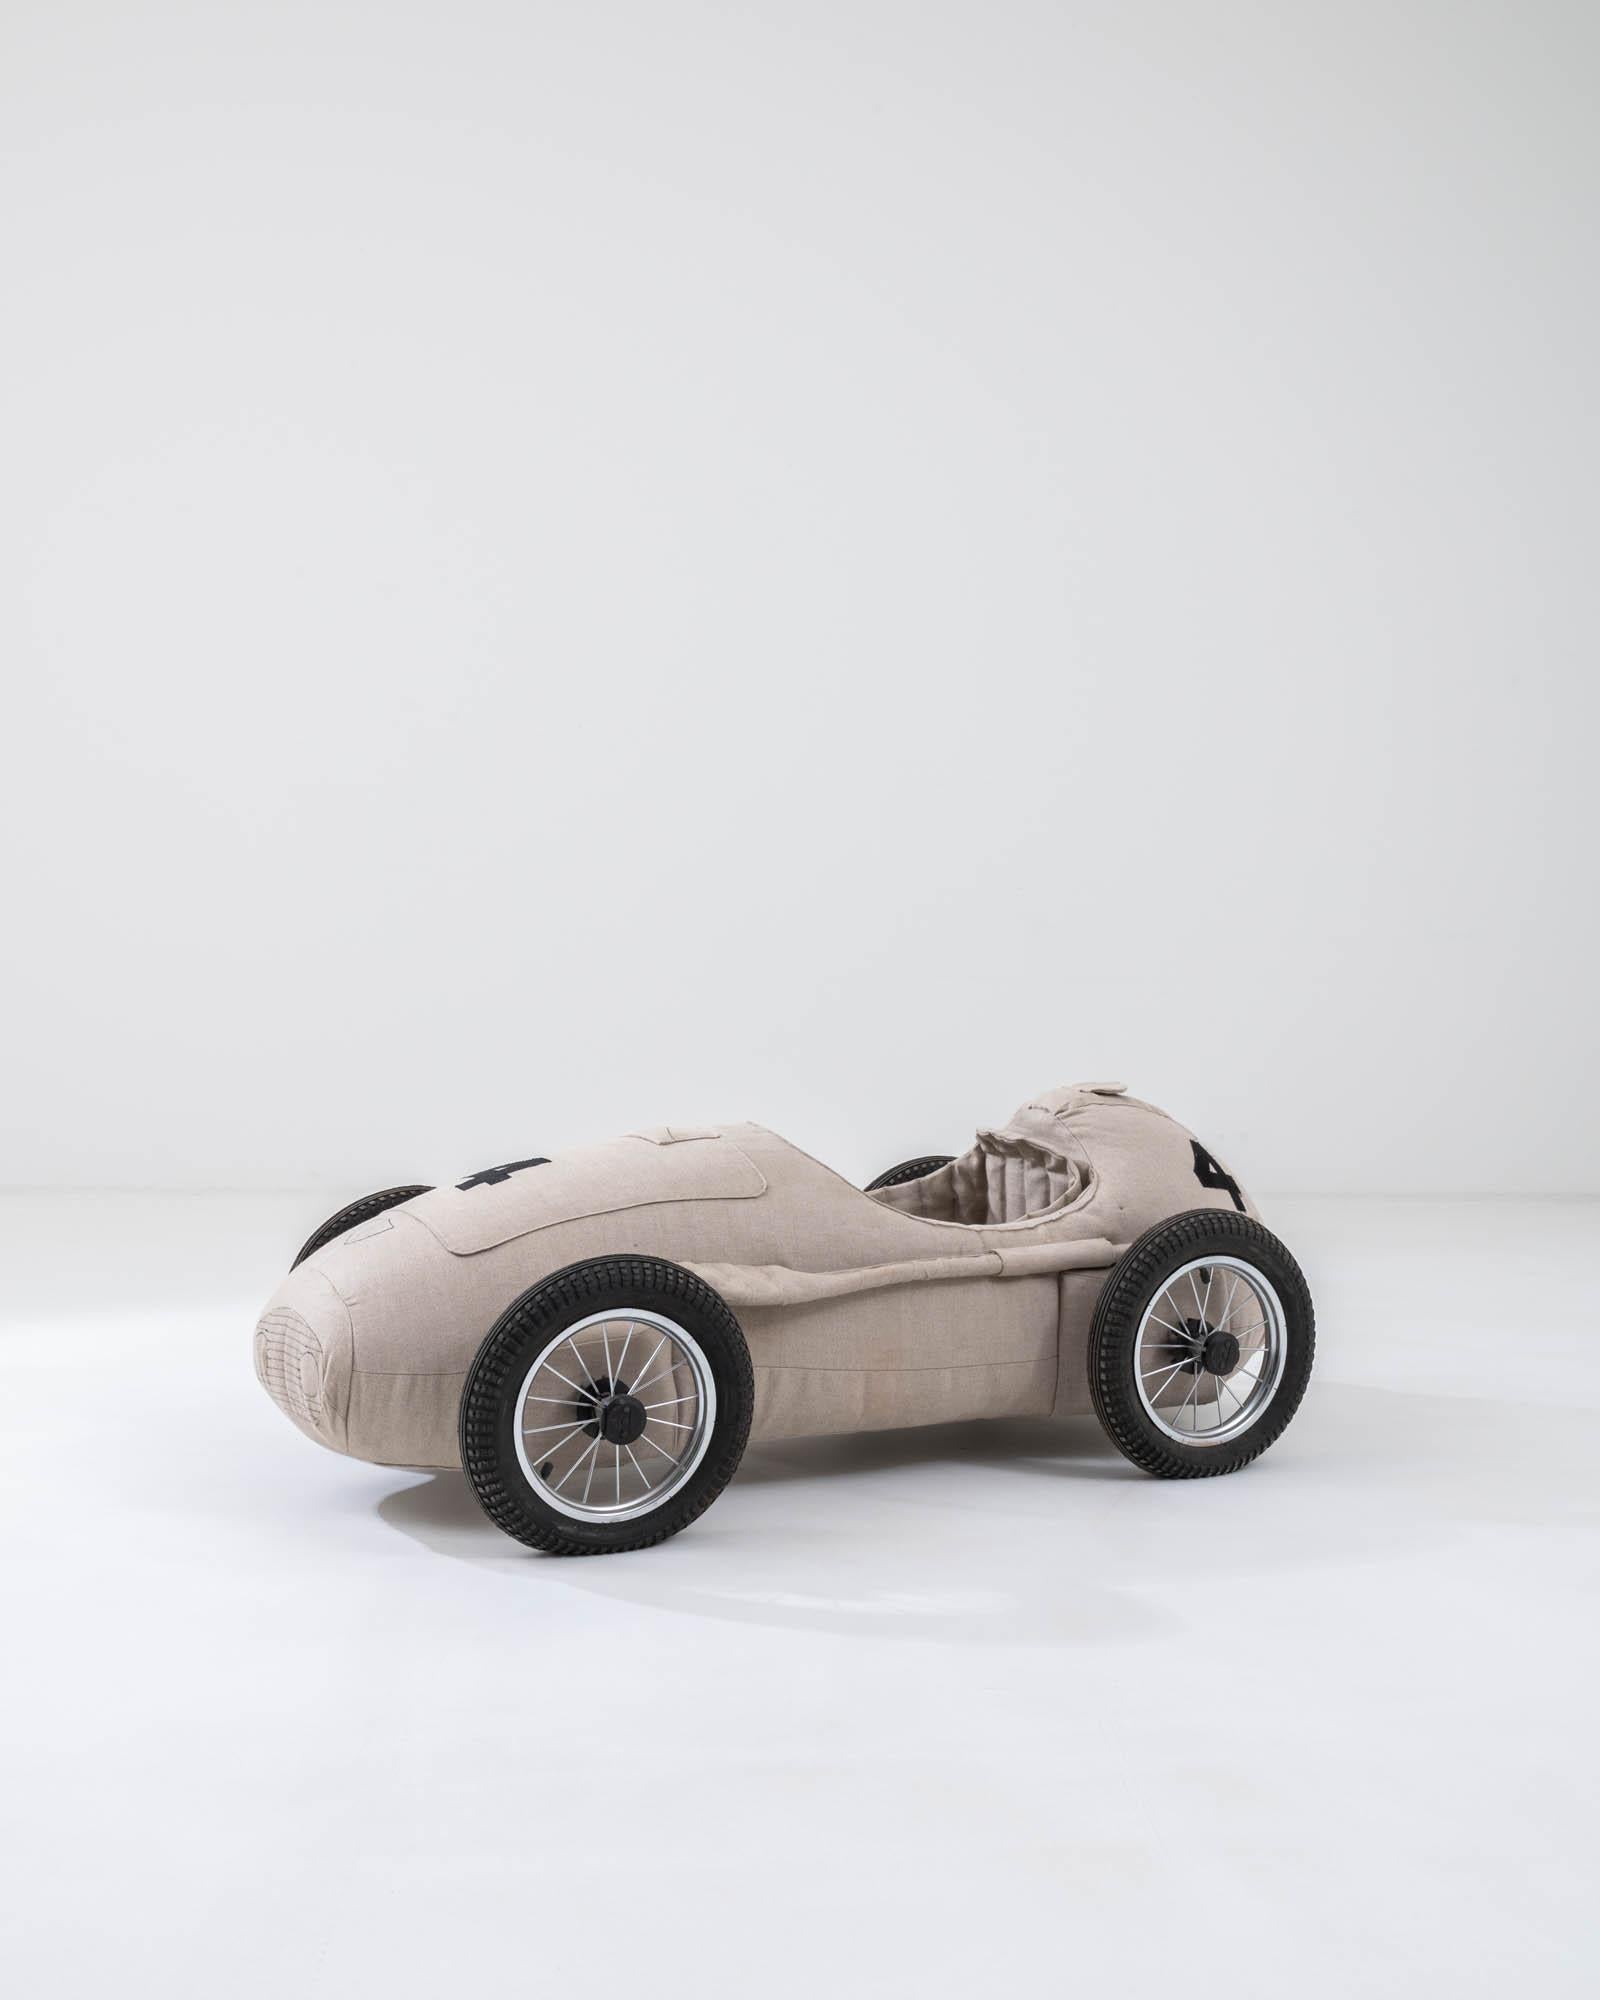 Contemporary Vintage Plush Upholstered Race Car 